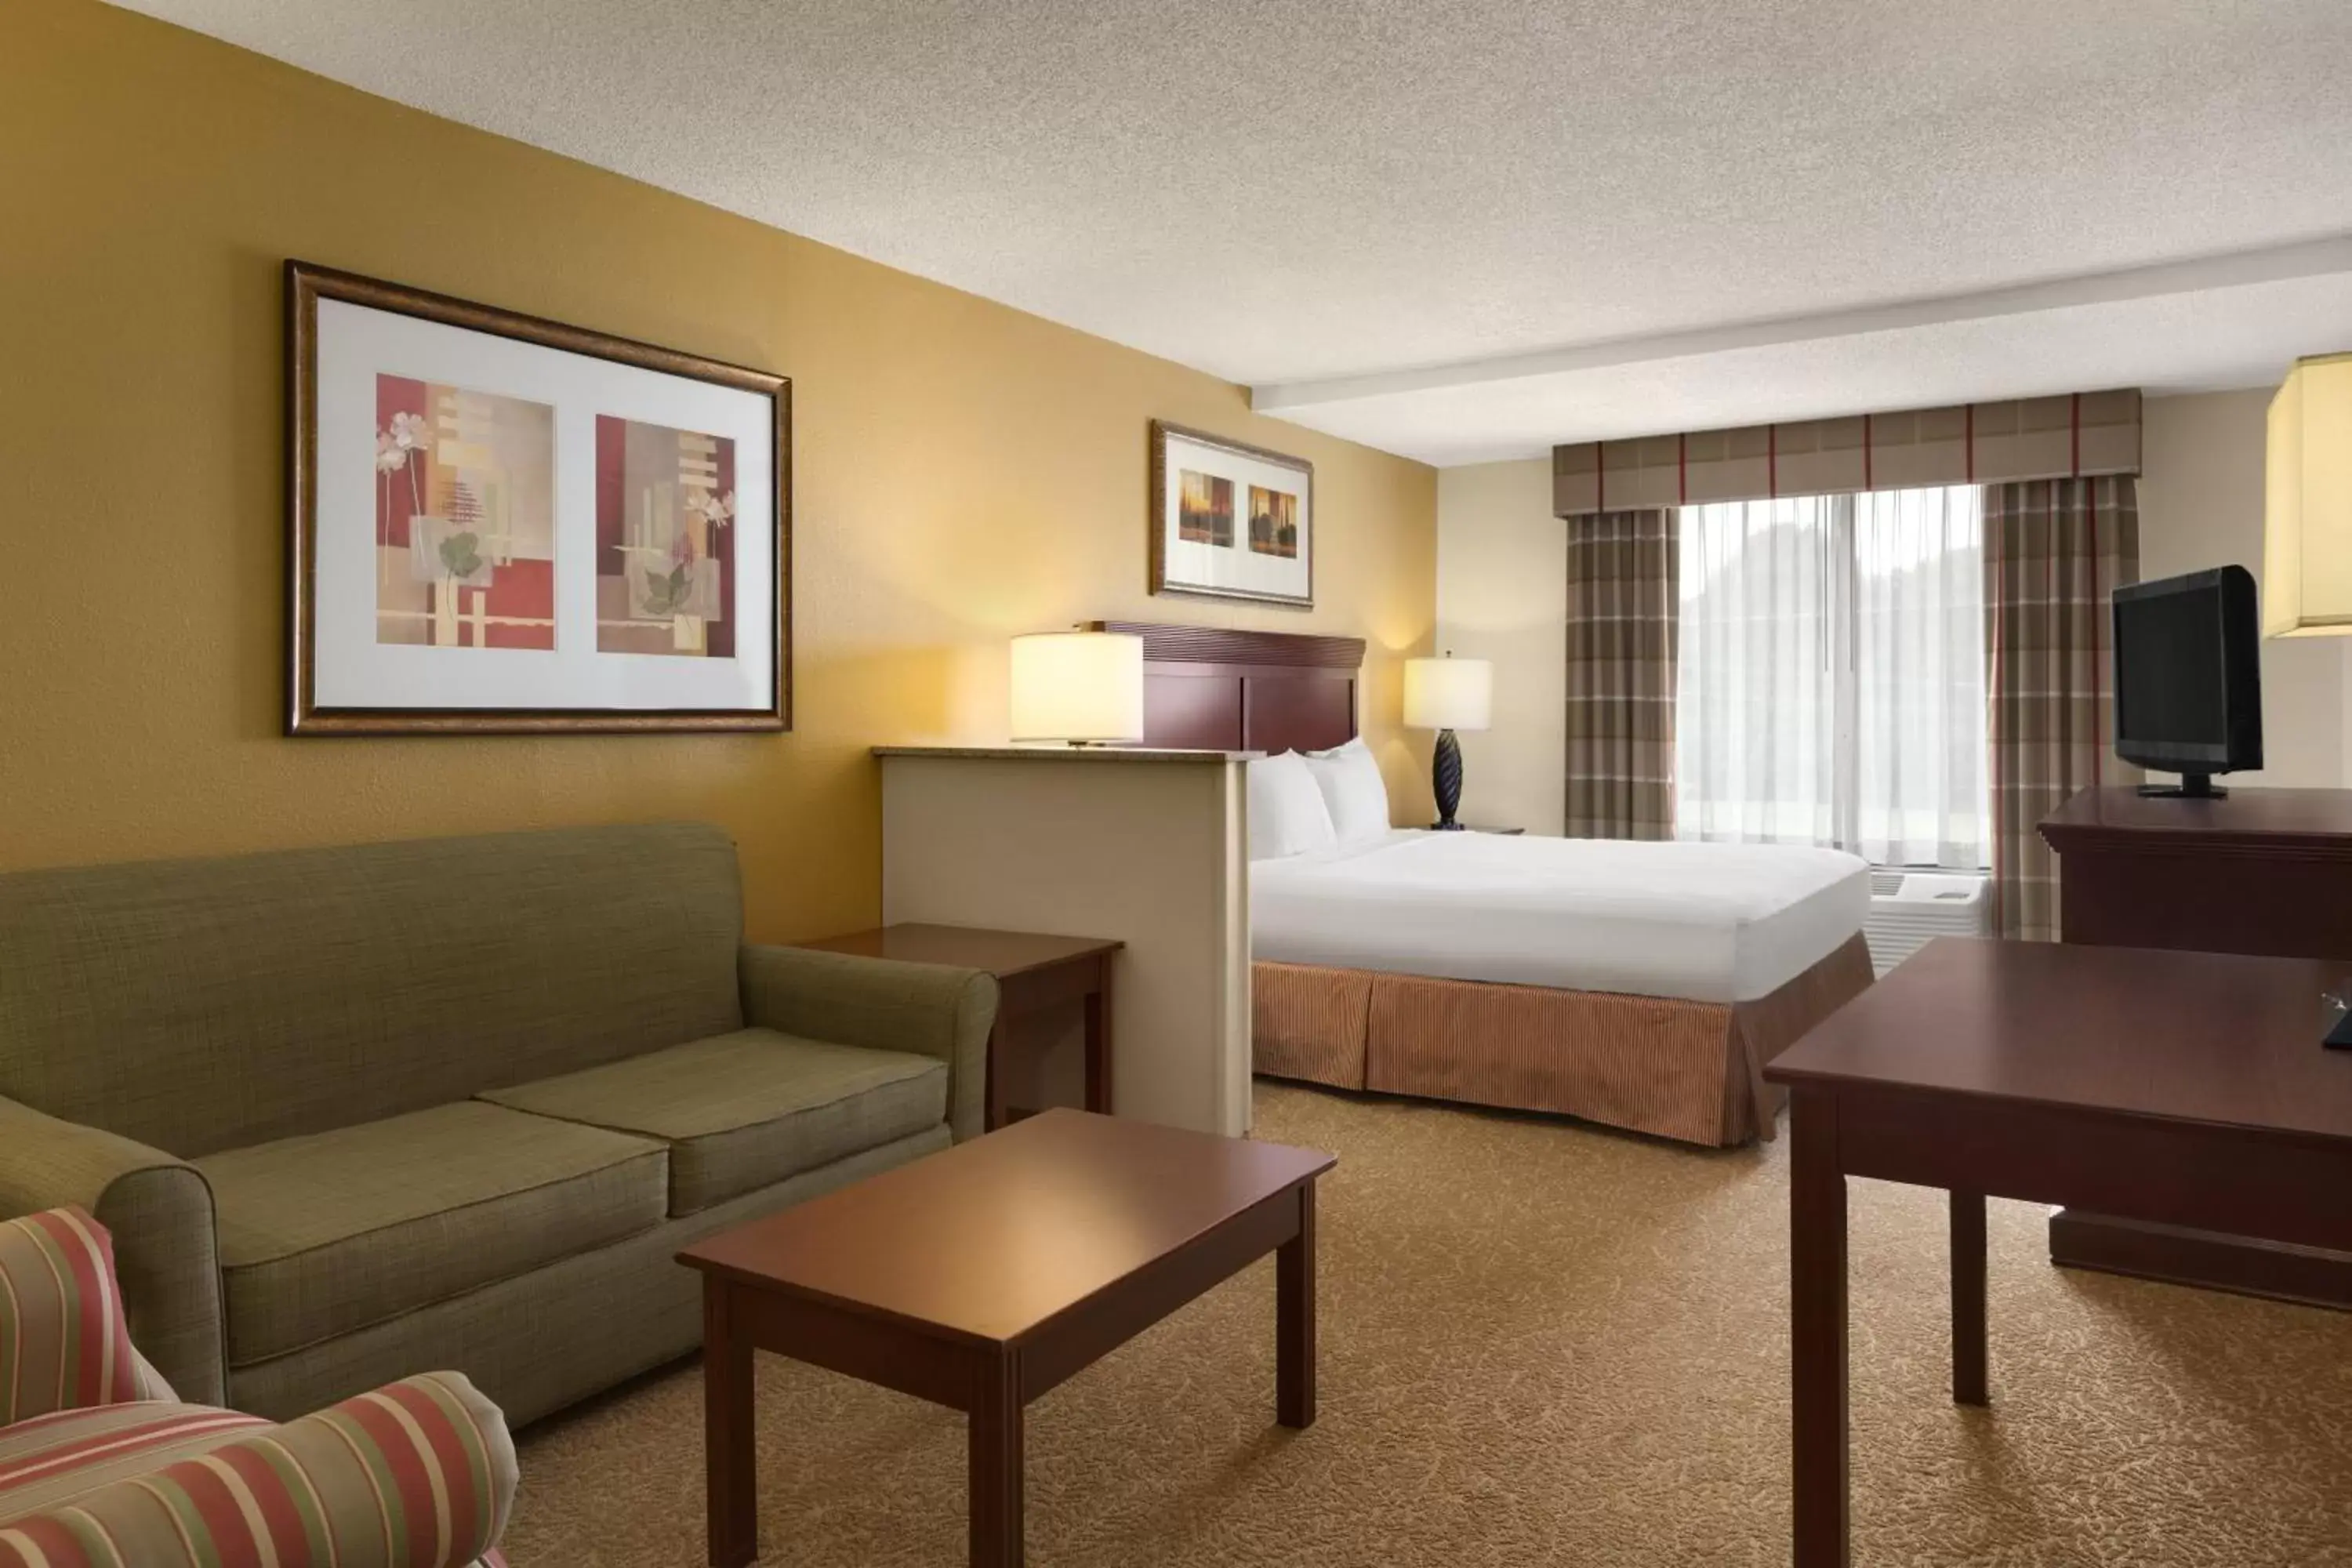 King Studio with Sofa Bed - Non-Smoking in Country Inn & Suites by Radisson, Atlanta Airport South, GA